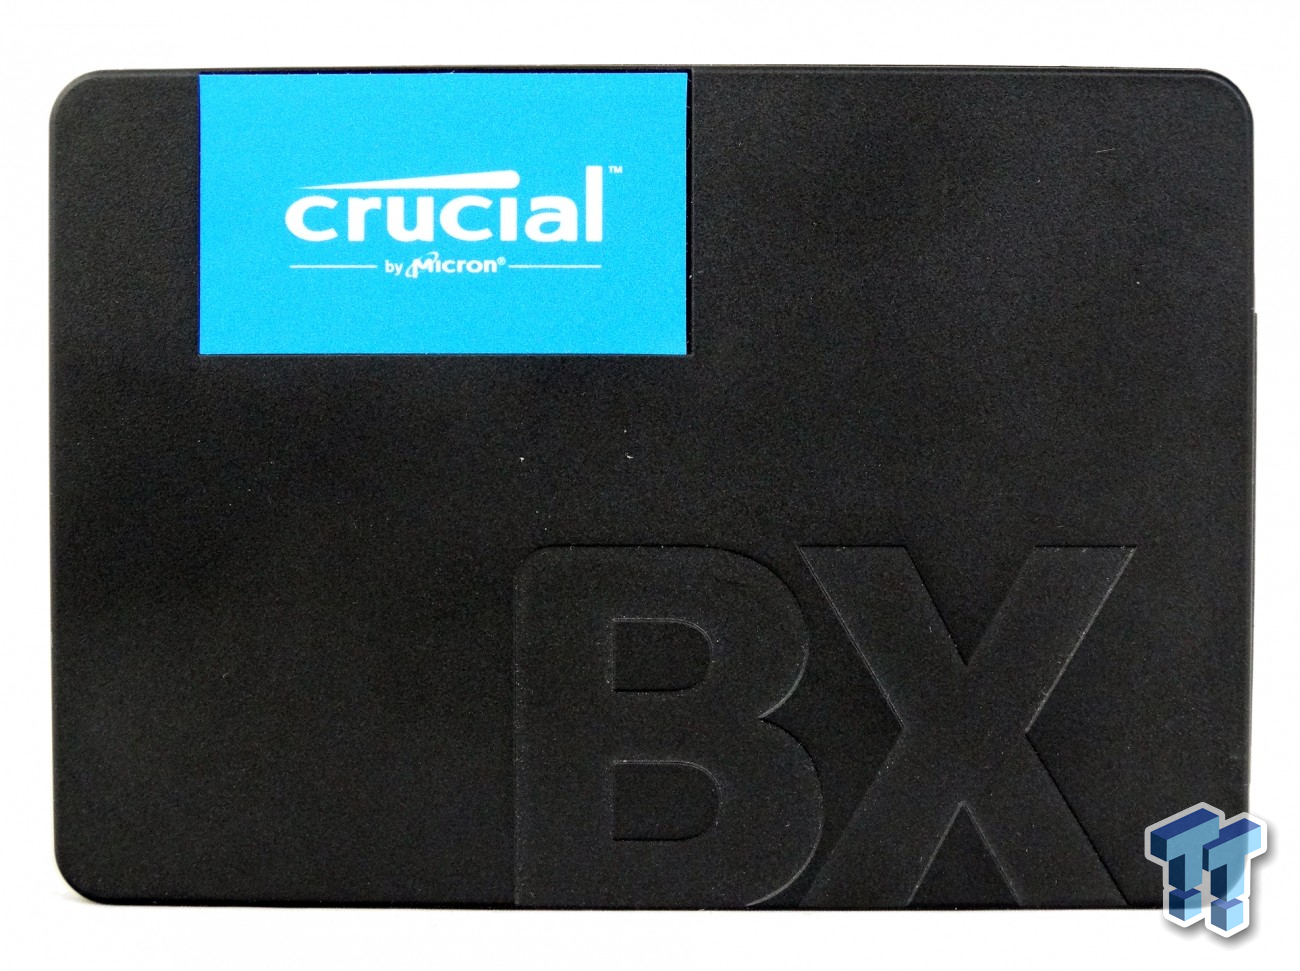 Crucial BX500 SATA SSD review